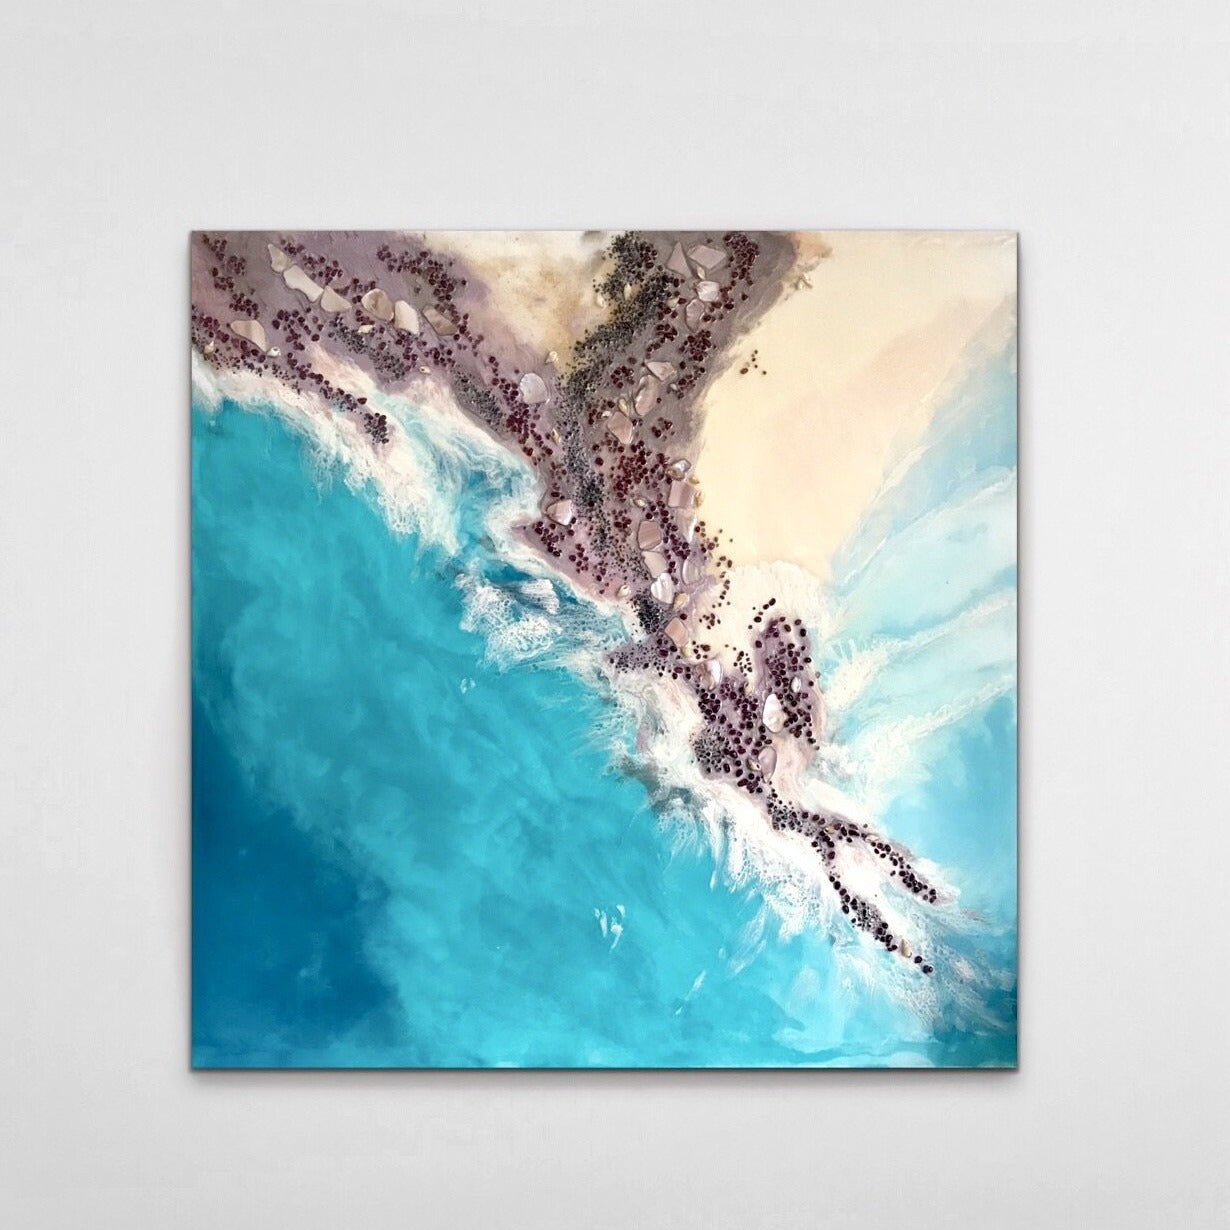 Teal Blue Ocean Wave. Byron Bay Magic. Original Artwork. Antuanelle 1 Magic with Mussels and Garnet. Abstract Seascape 90x90cm